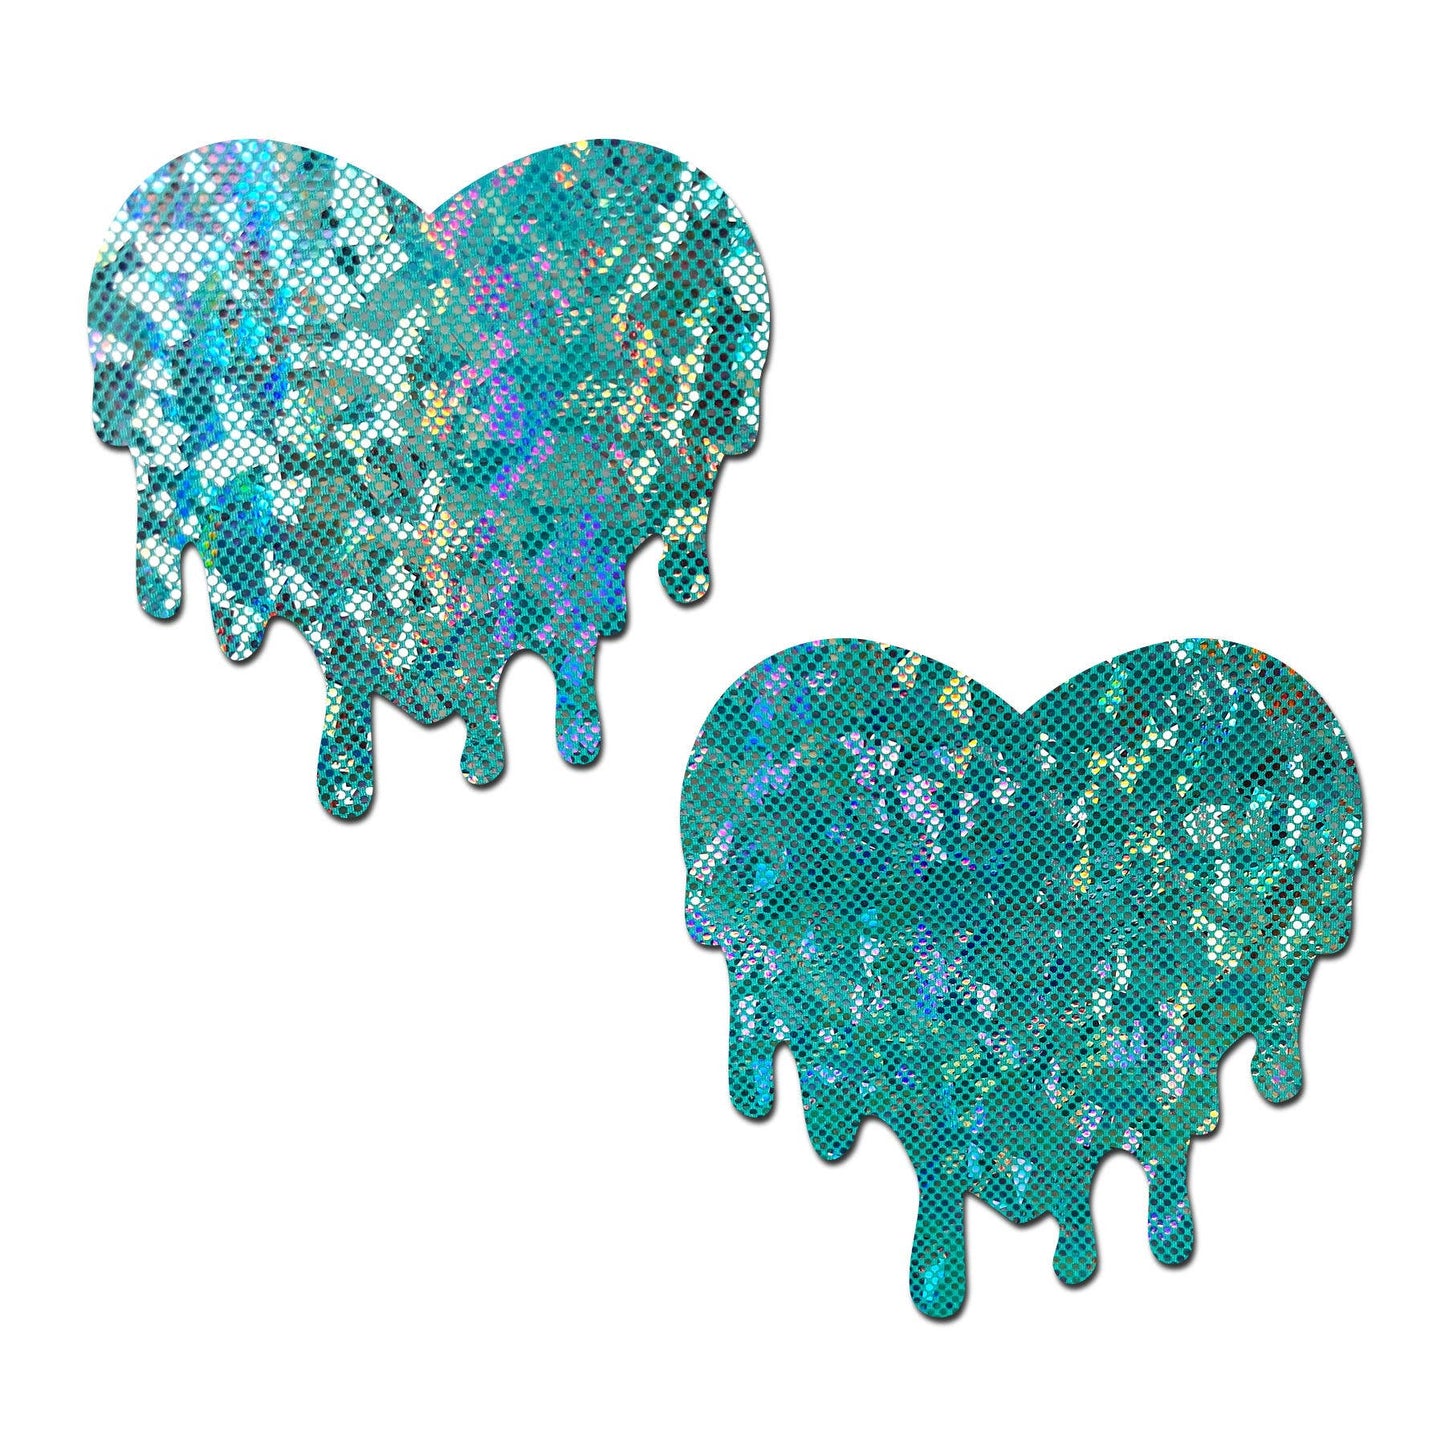 Melty Heart: Shattered Glass Seafoam Melty Heart Pasties